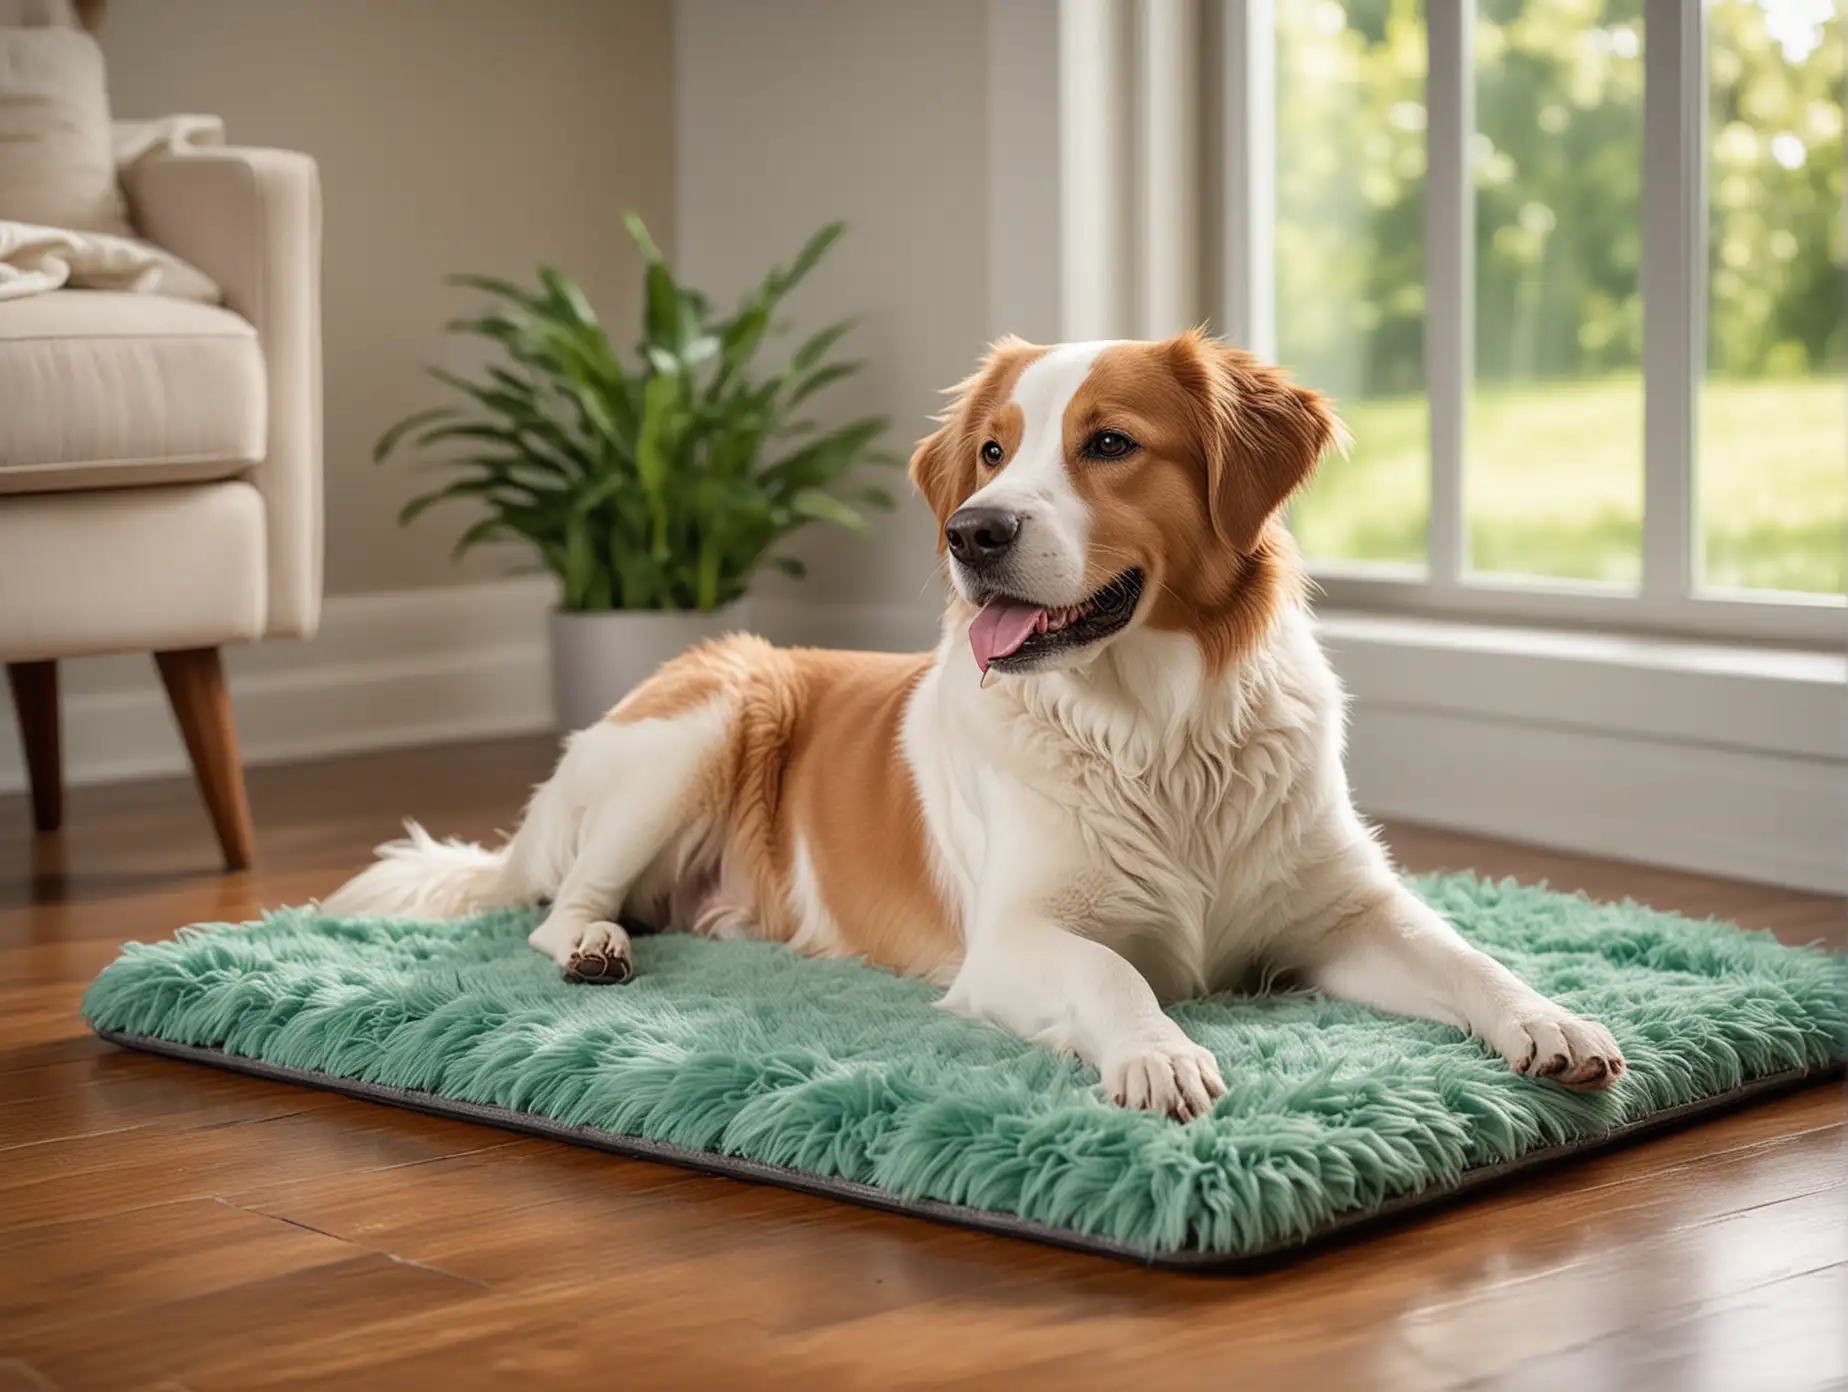 Happy Dog Relaxing on Cooling Pad in Luxurious Home Setting